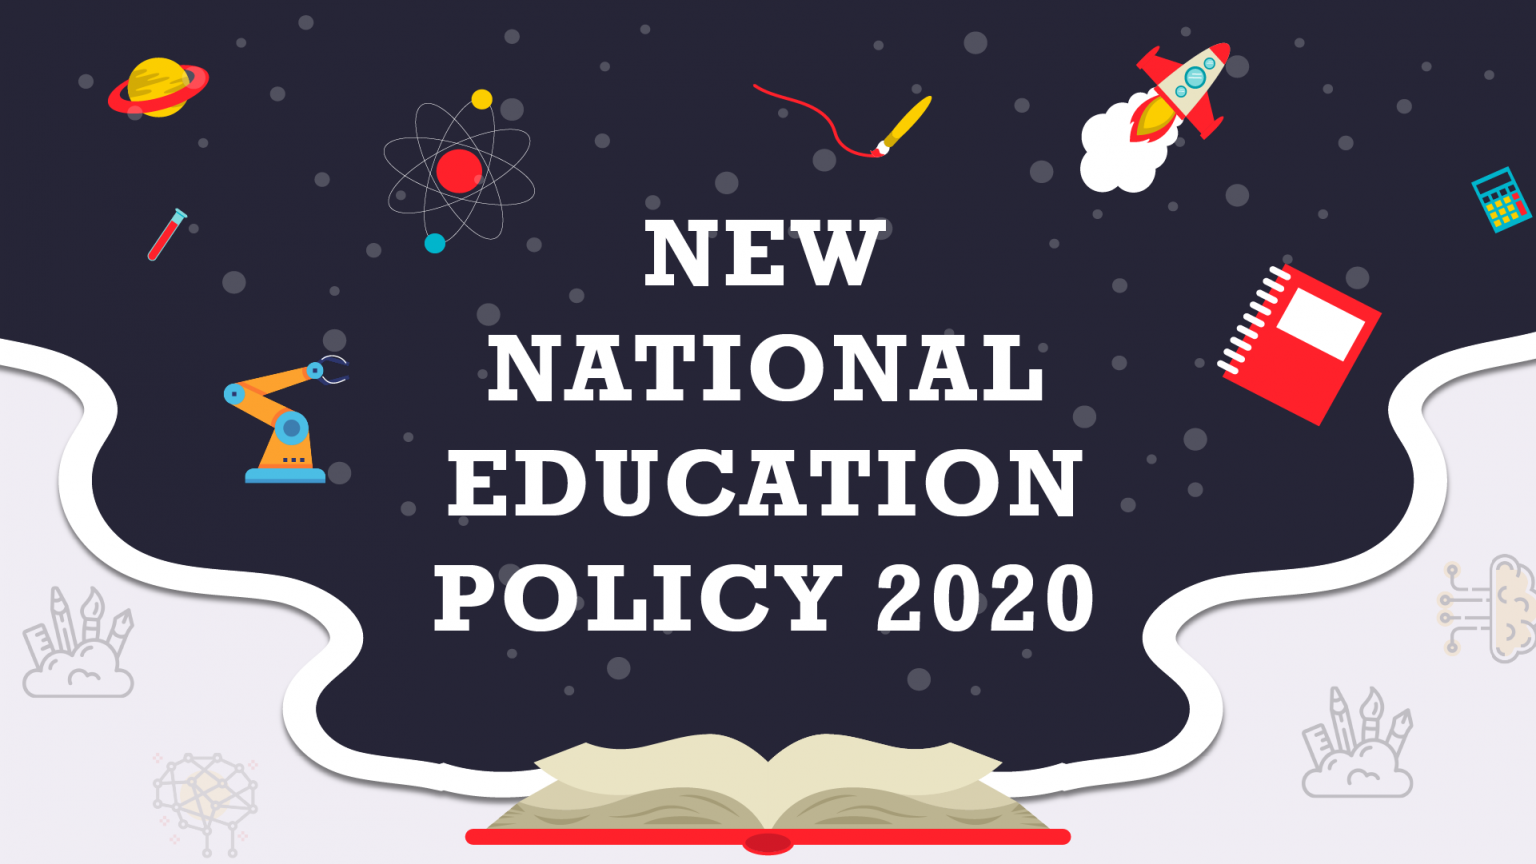 articles on new education policy 2020